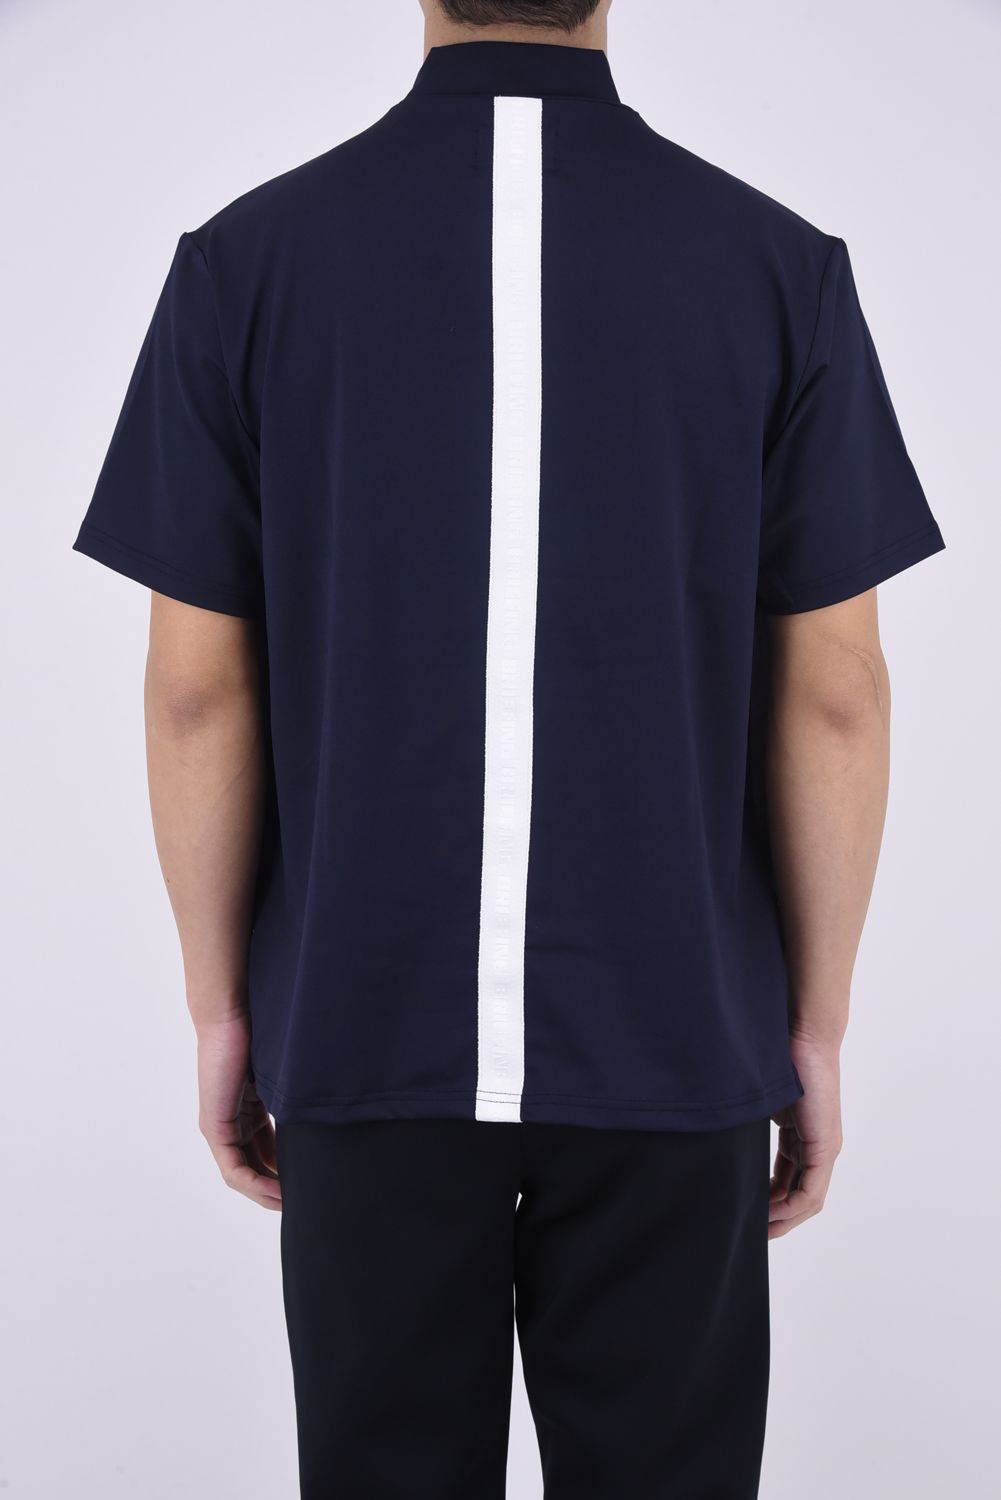 BRIEFING - 【24SS】 MENS BACK LOGO LINE HIGH NECK RELAXED FIT 